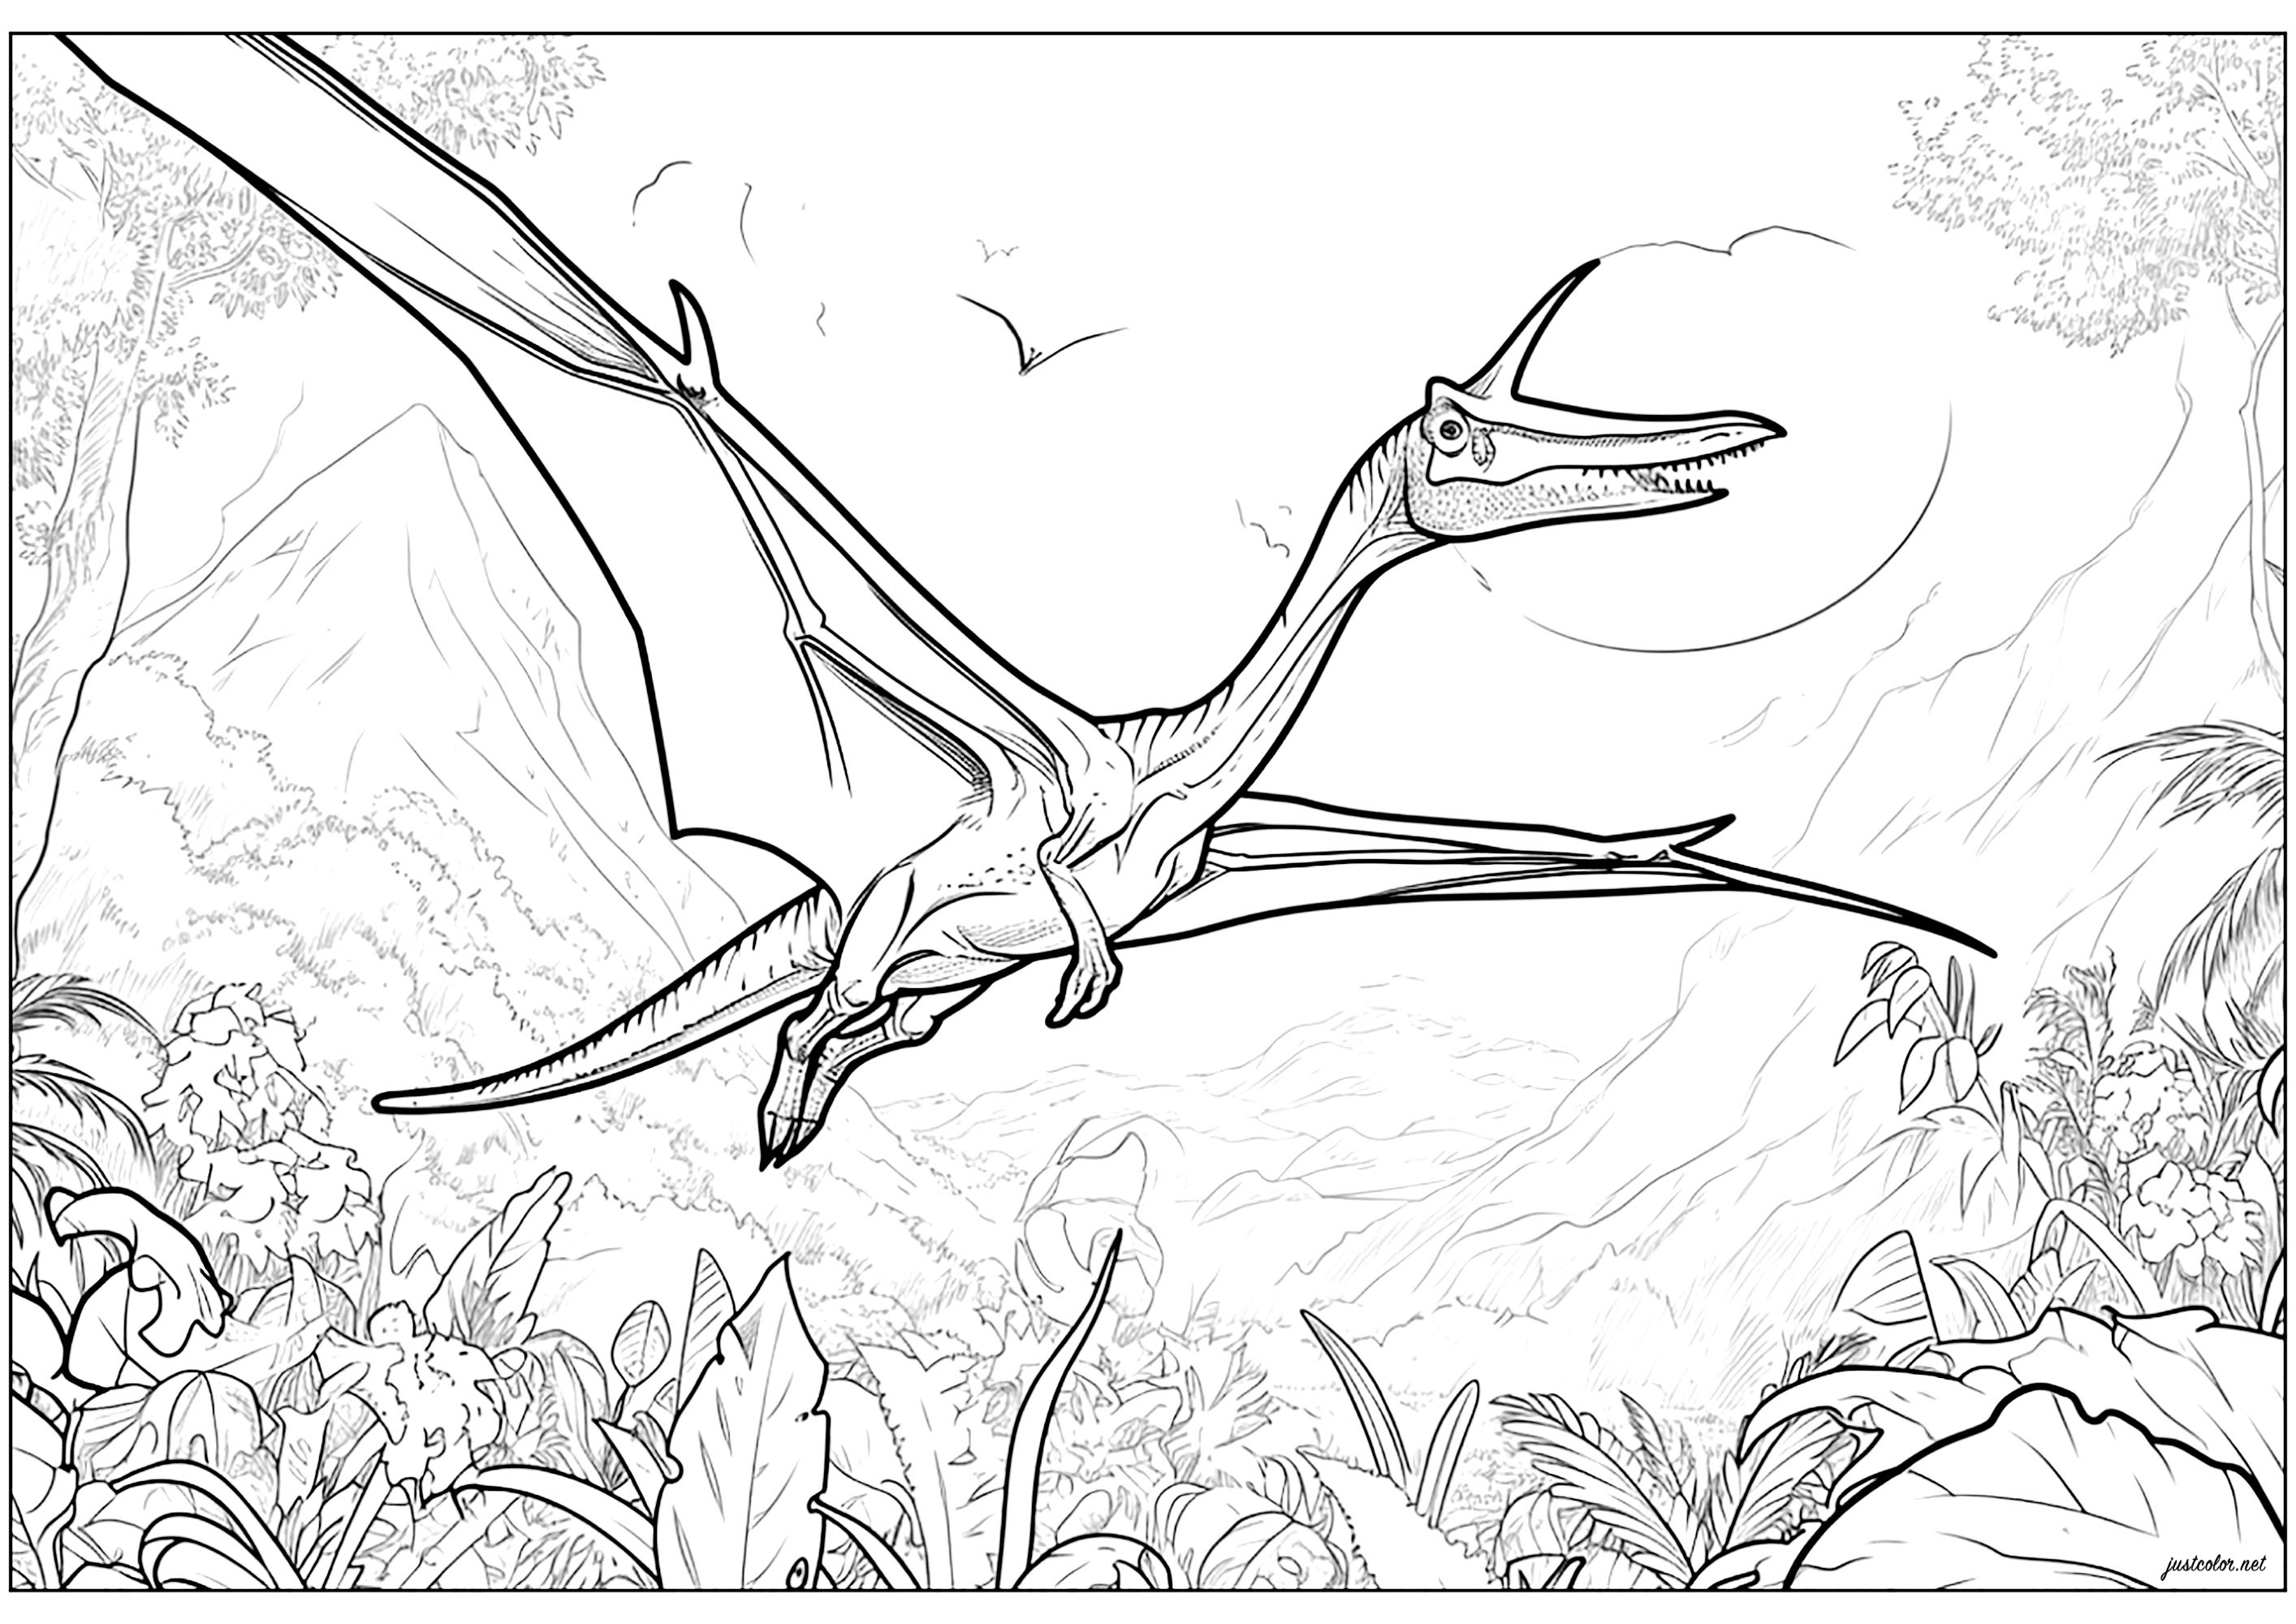 Coloring page : Dinosaurier - 6